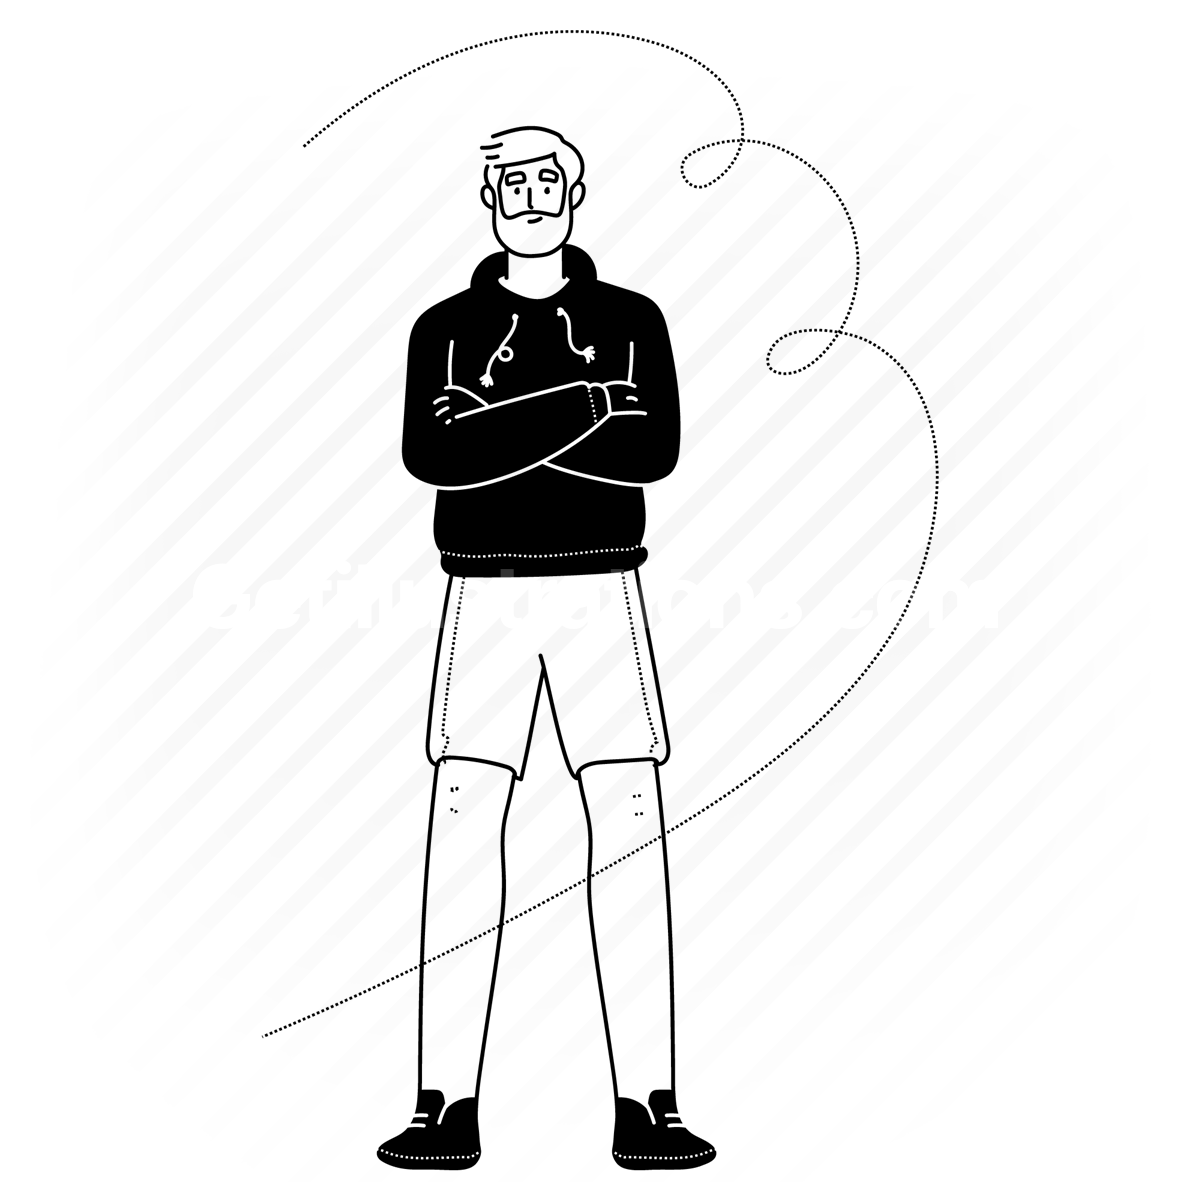 movement, pose, people, person, user, avatar, man, stand, shorts